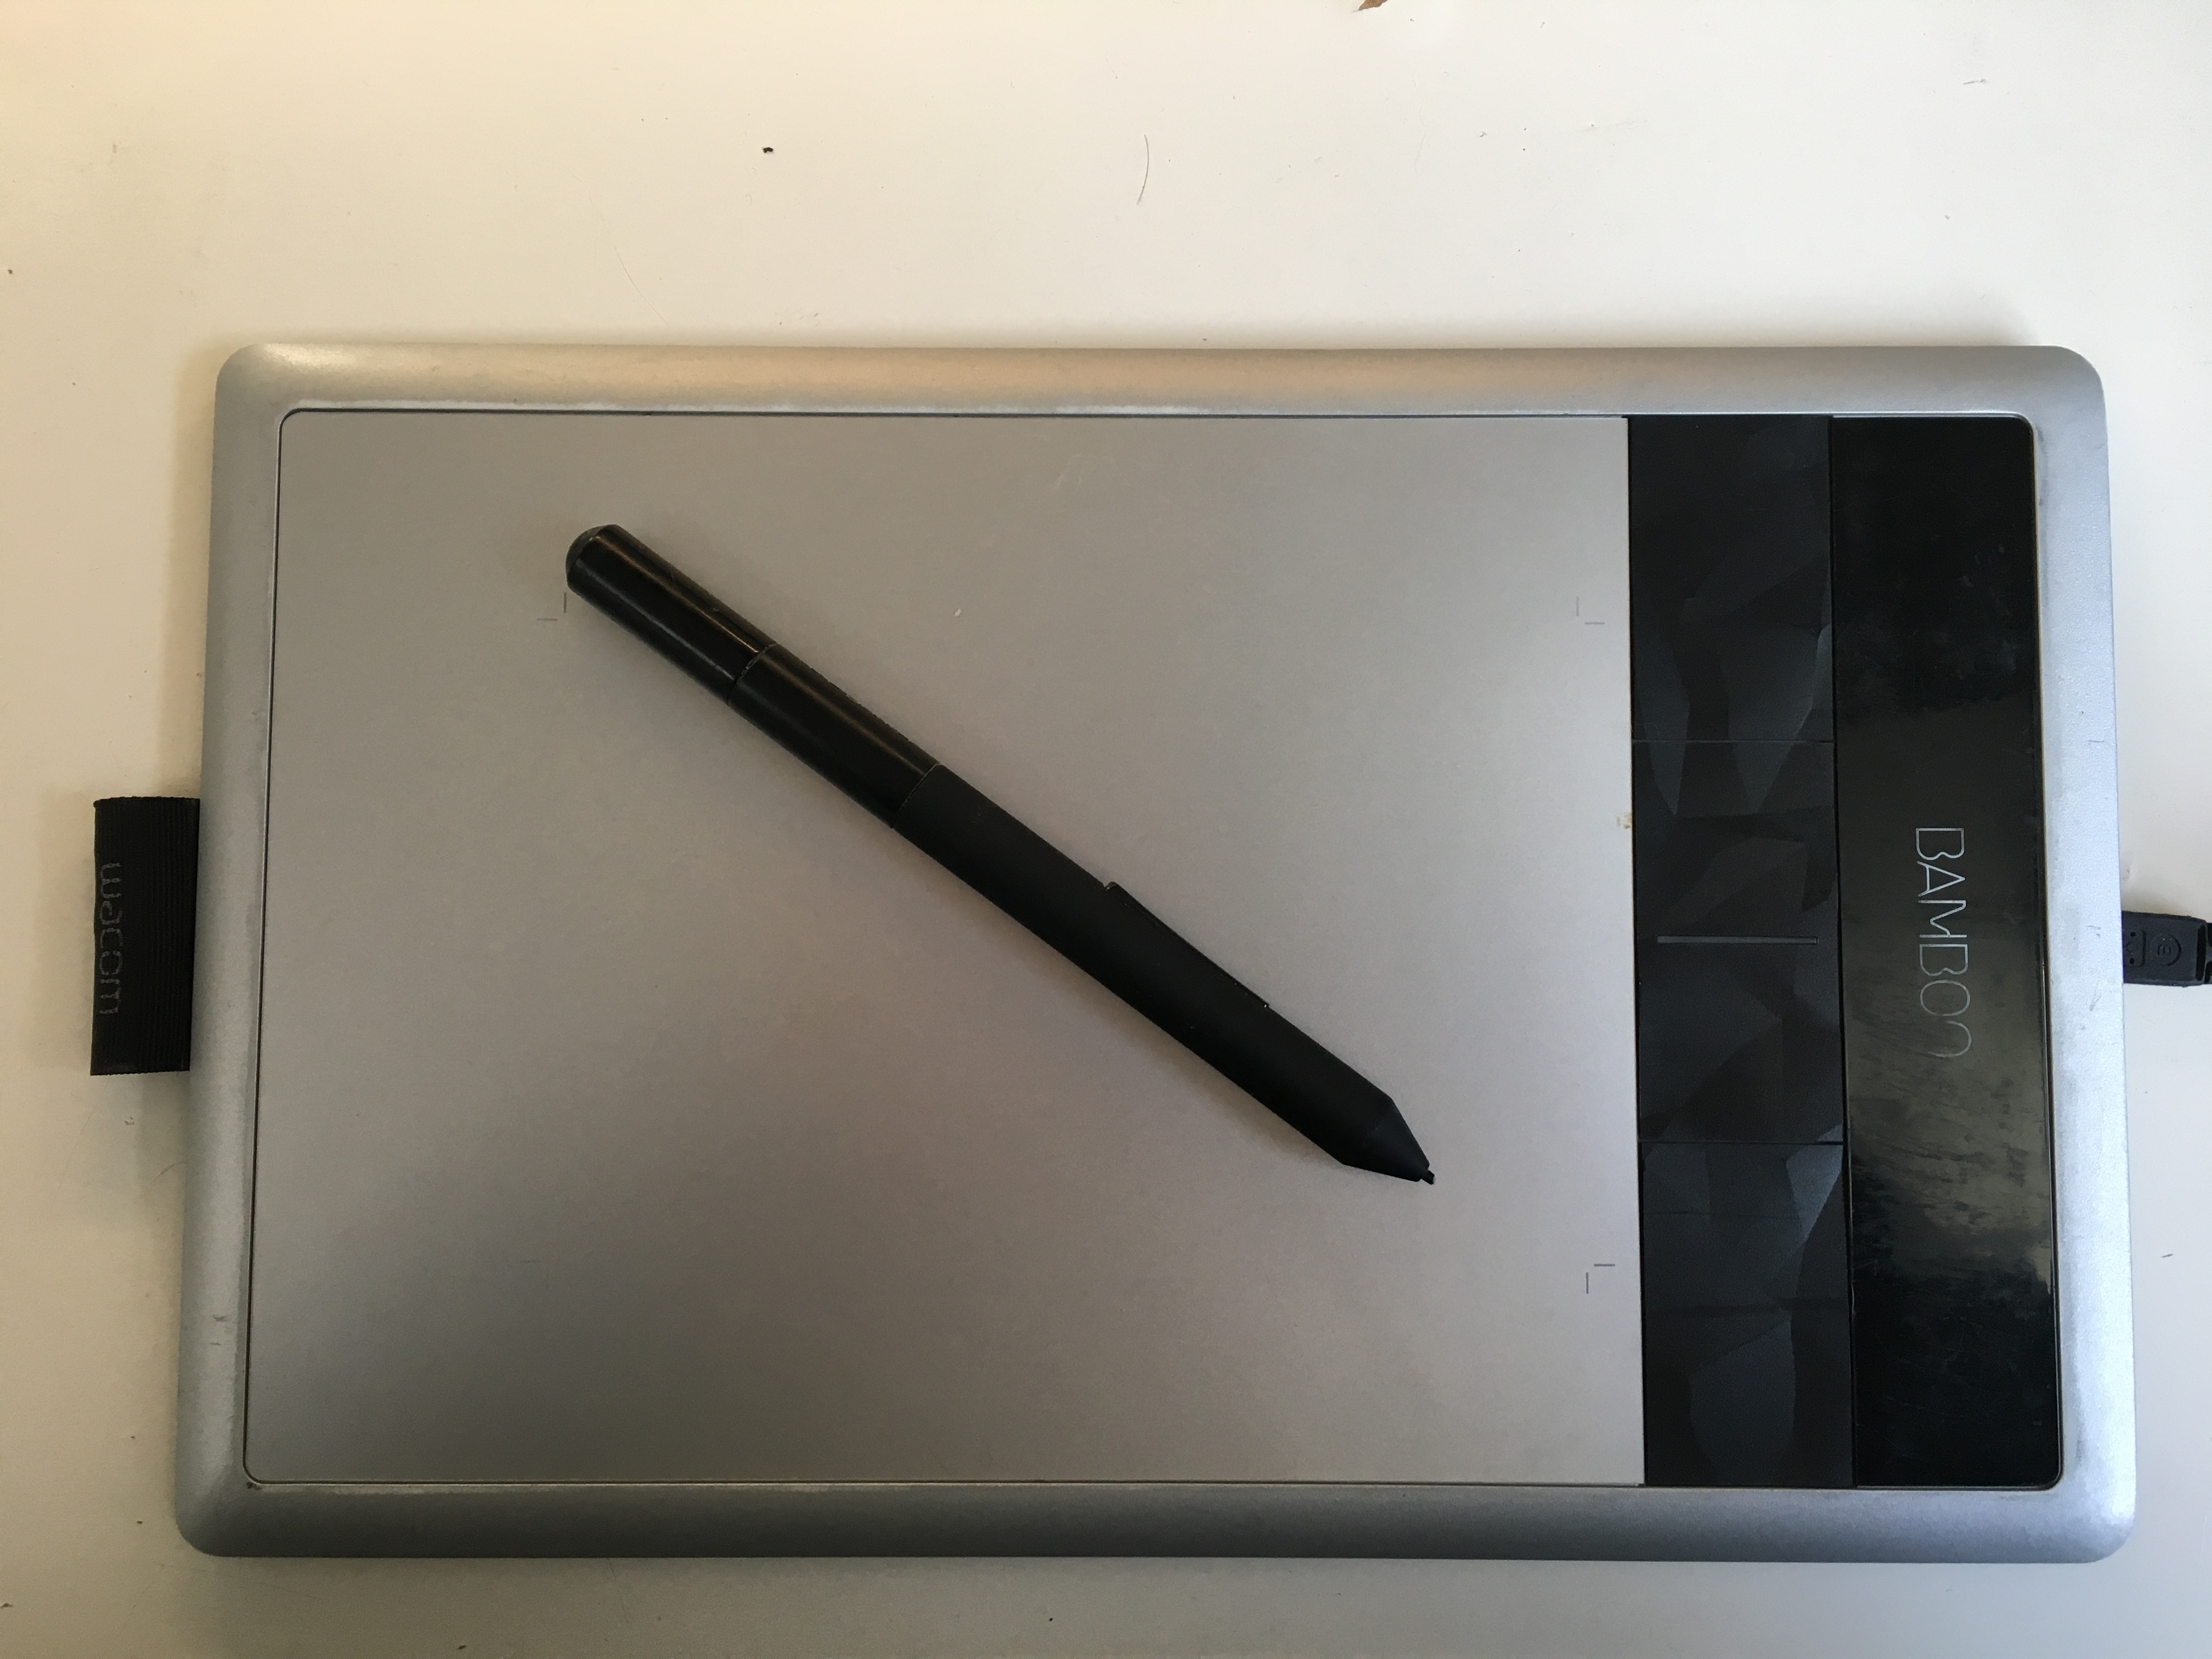 wacom cth-670 a supported tablet was not found